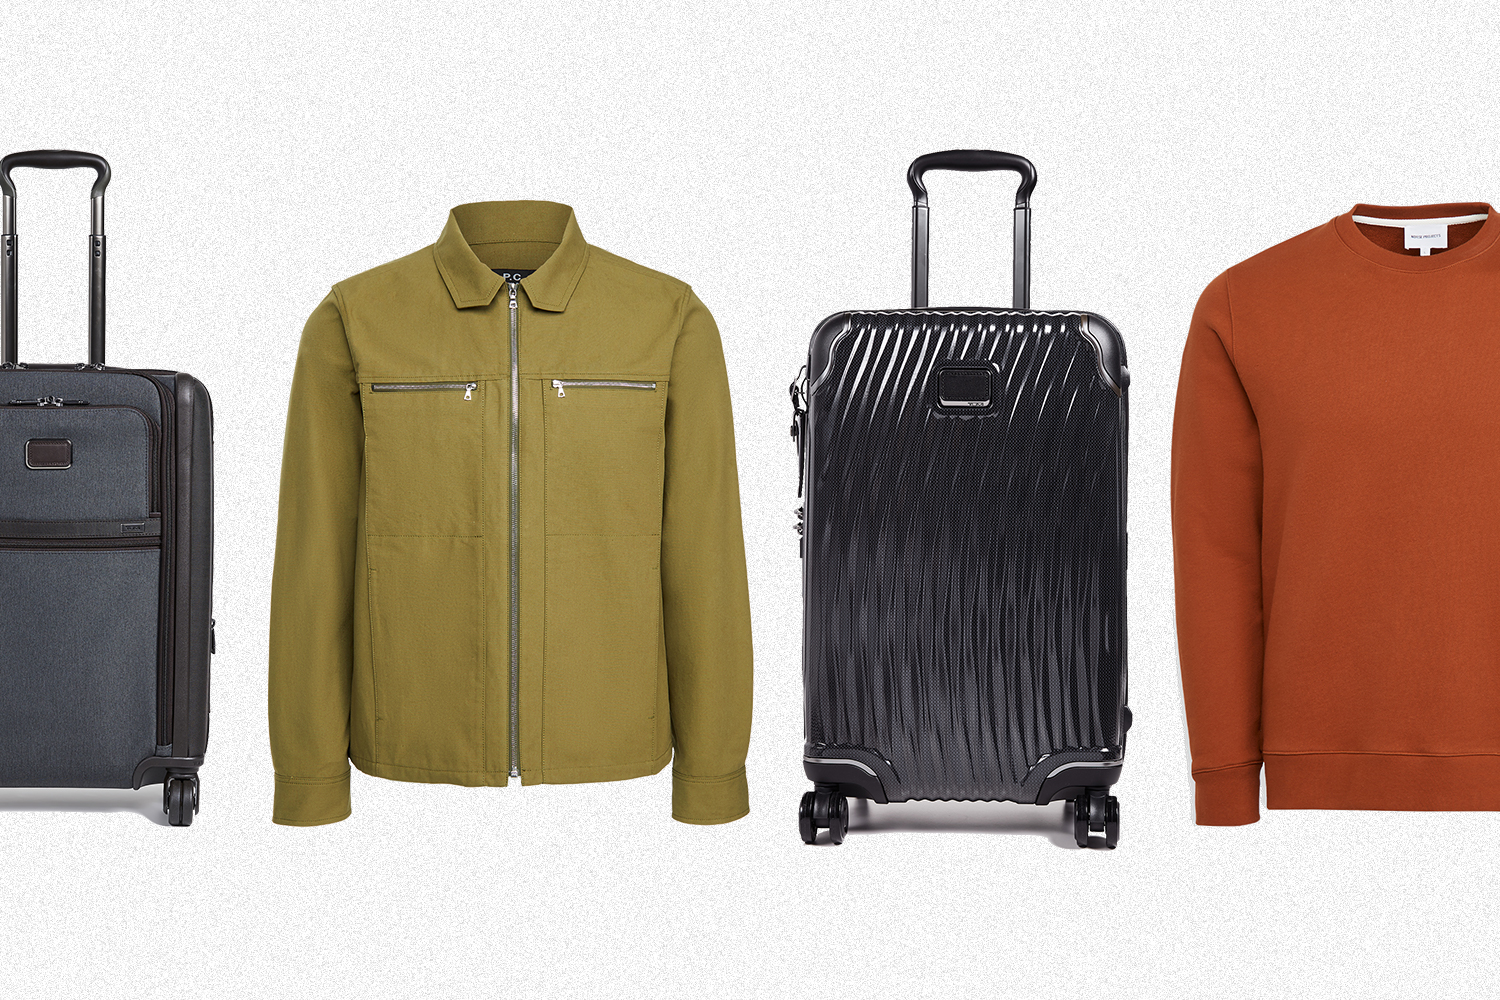 Tumi luggage, a green APC jacket and an orange Norse Projects sweatshirt, all available on Shopbop Men, formerly East Dane